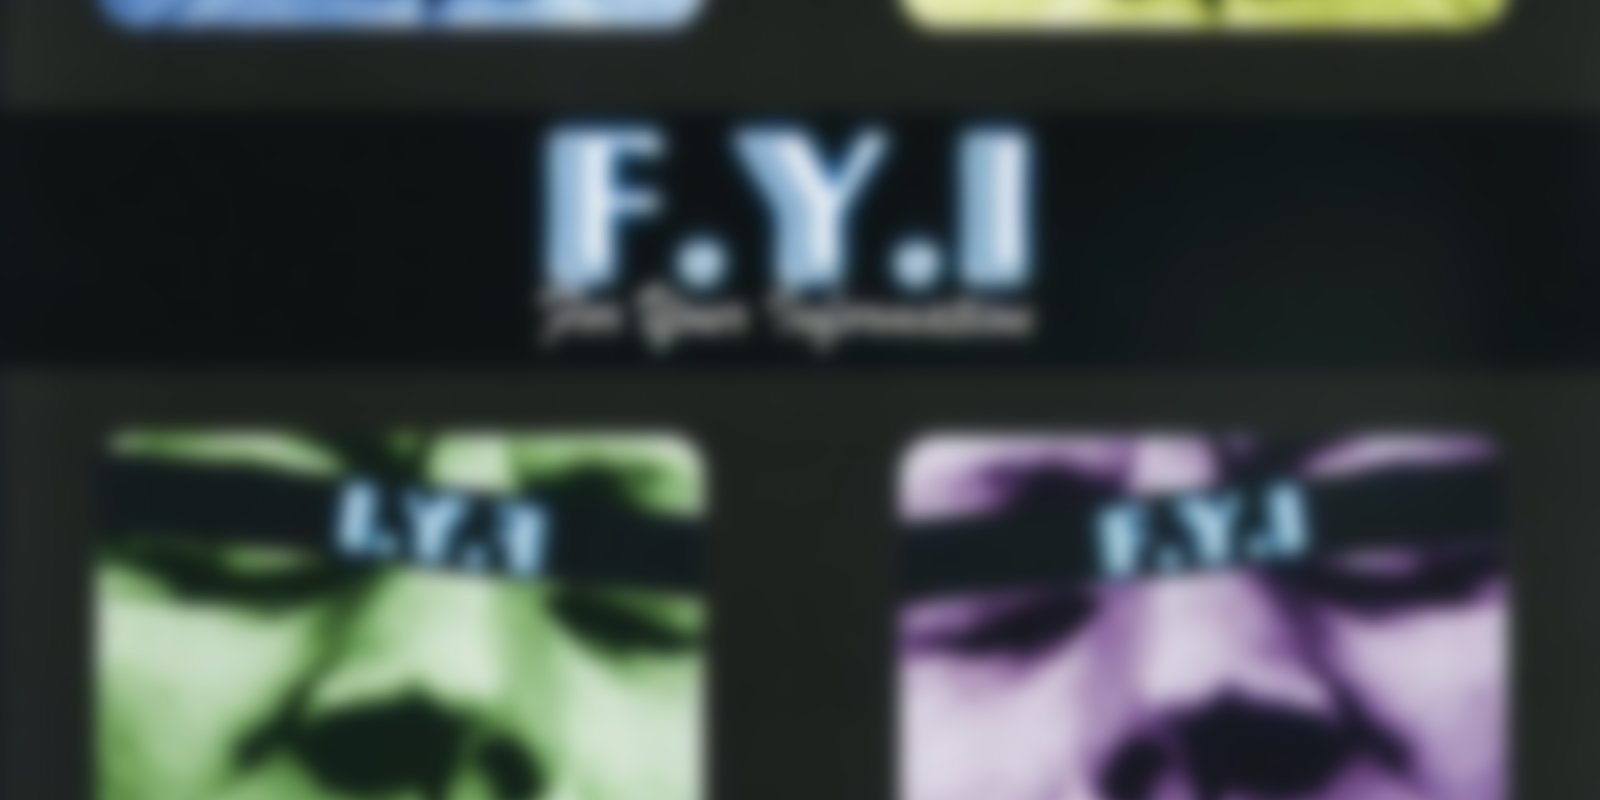 F.Y.I. - For Your Information